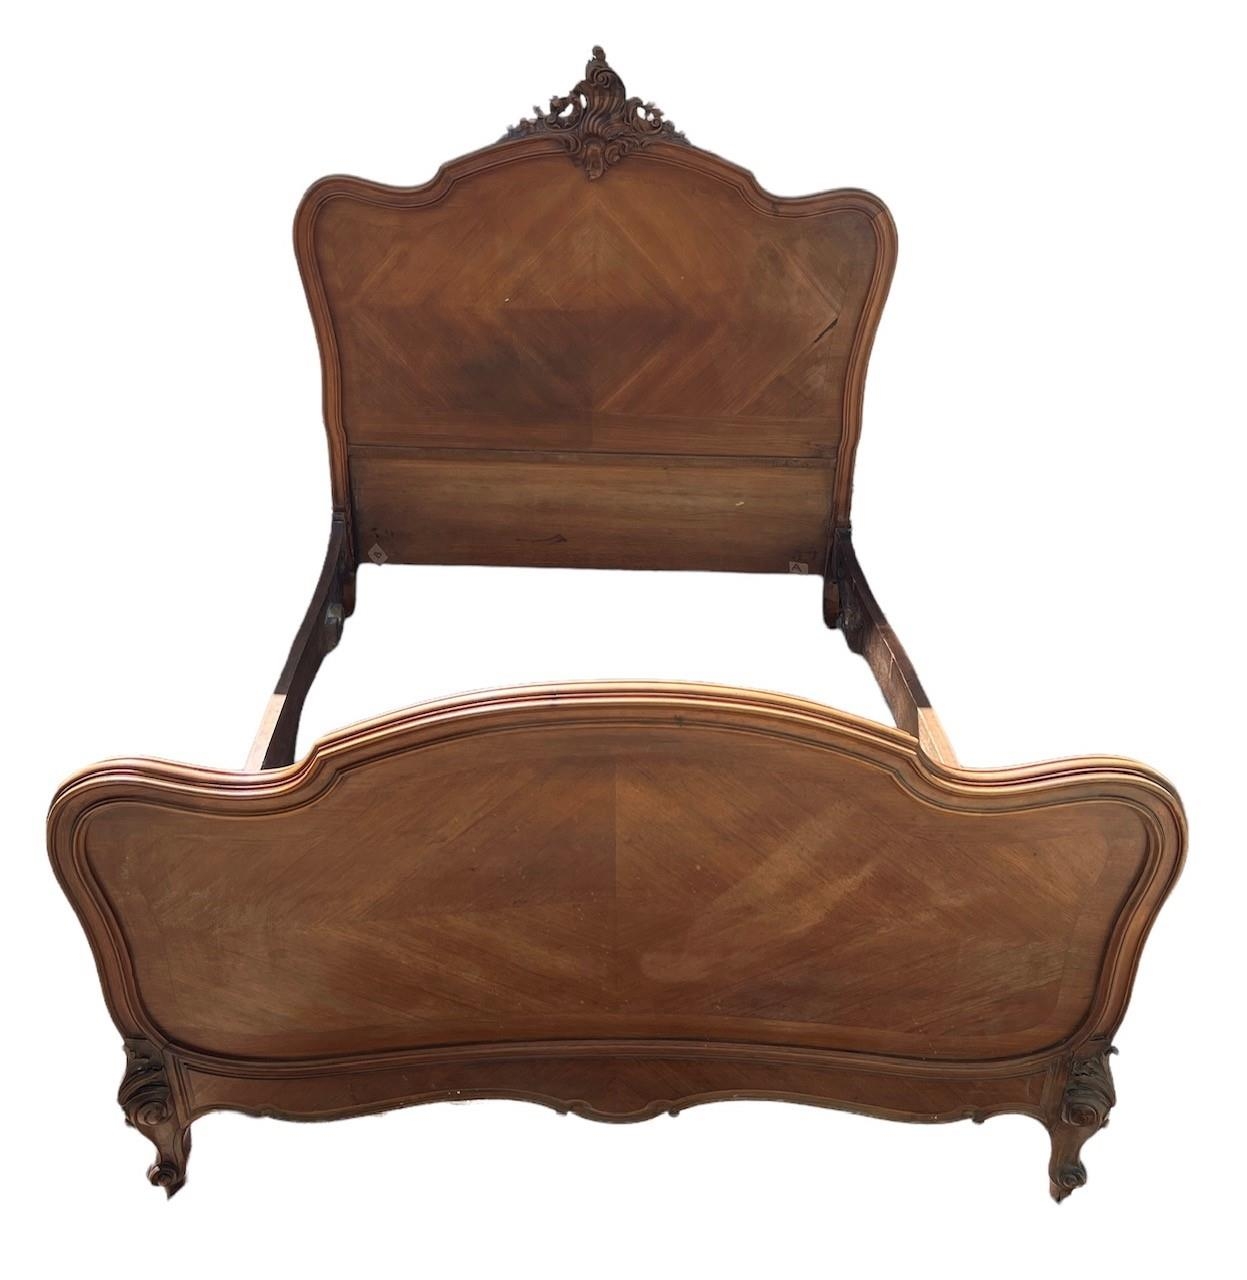 A 19TH CENTURY FRENCH LOUIS XVI DESIGN CARVED WALNUT DOUBLE BED. (h 149cm x w 147cm x length 203cm)